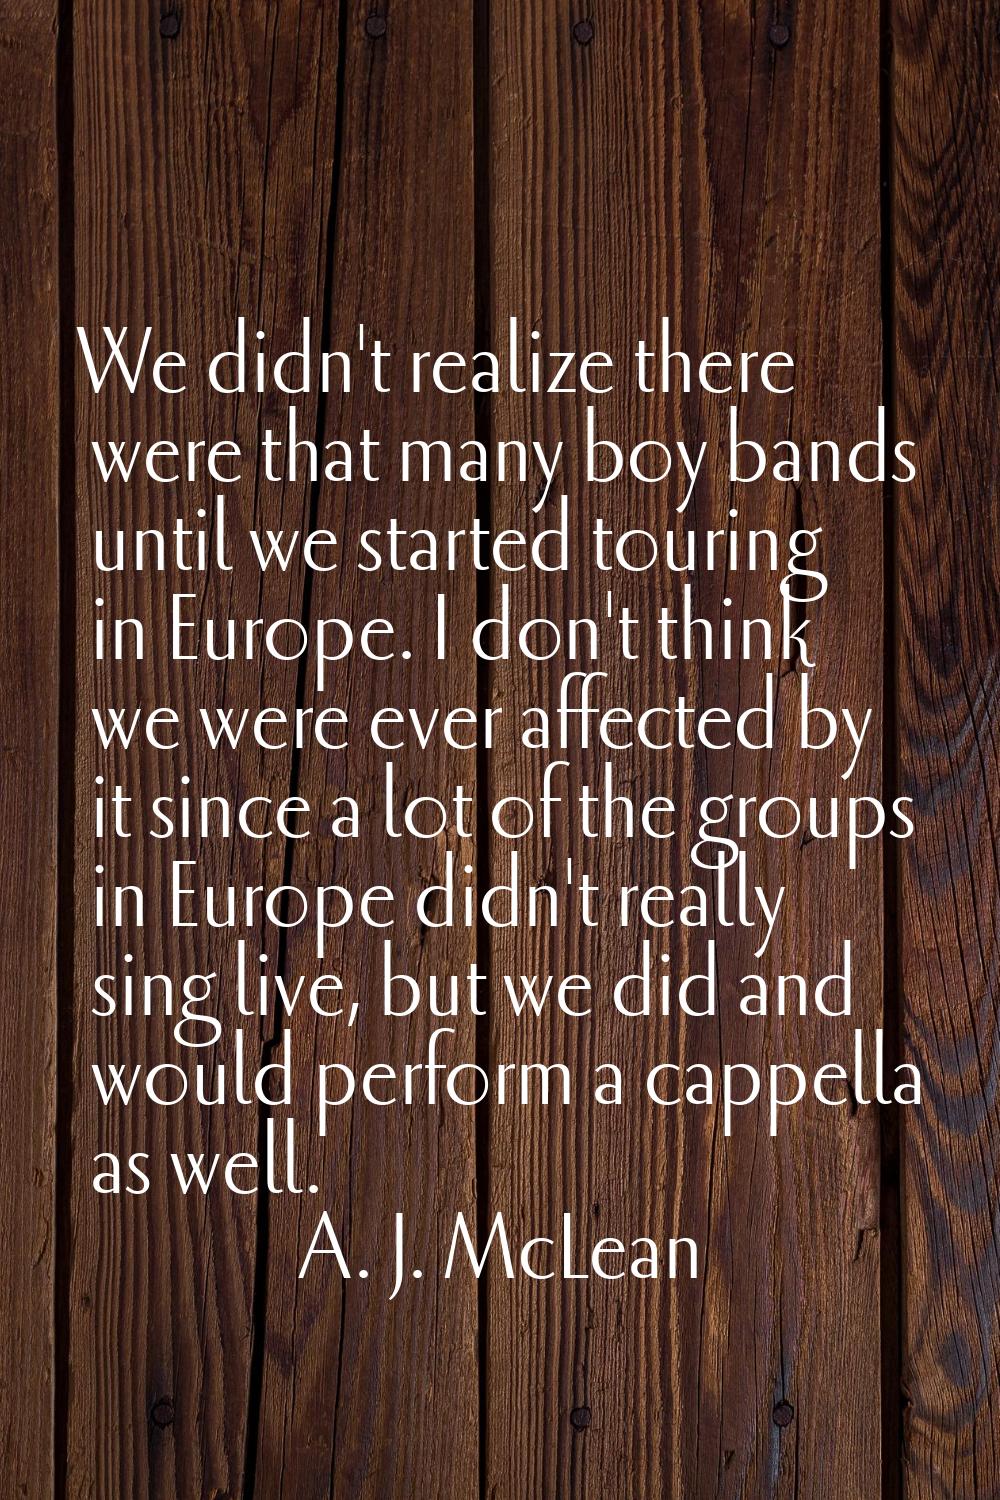 We didn't realize there were that many boy bands until we started touring in Europe. I don't think 